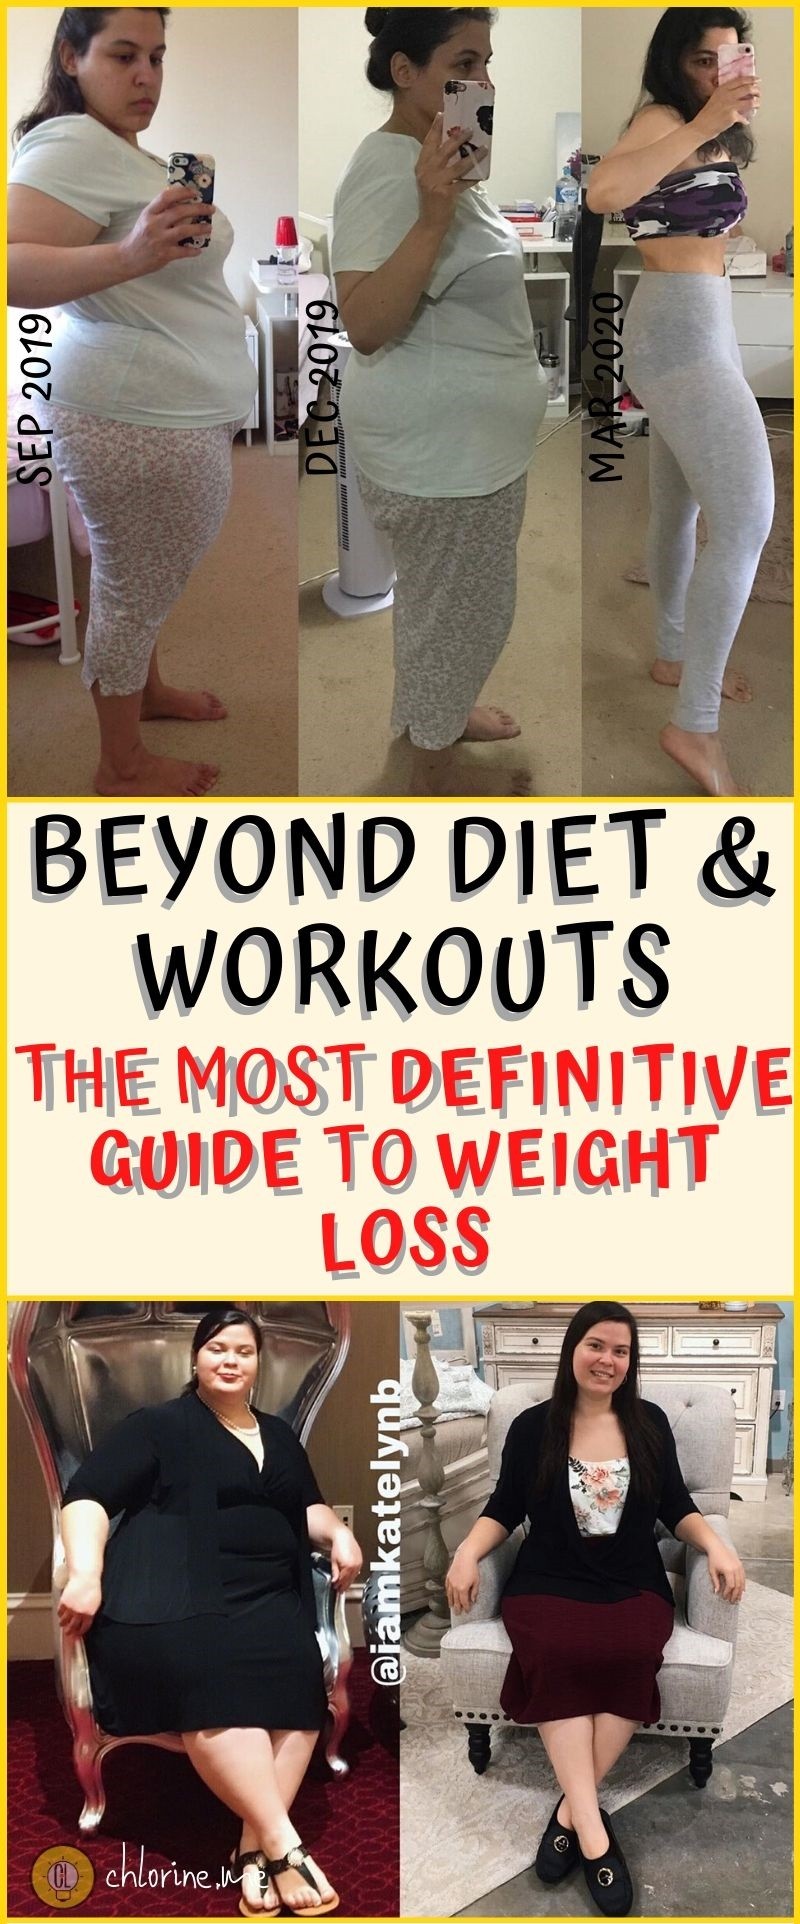 the most definitive guide to weight loss (2)